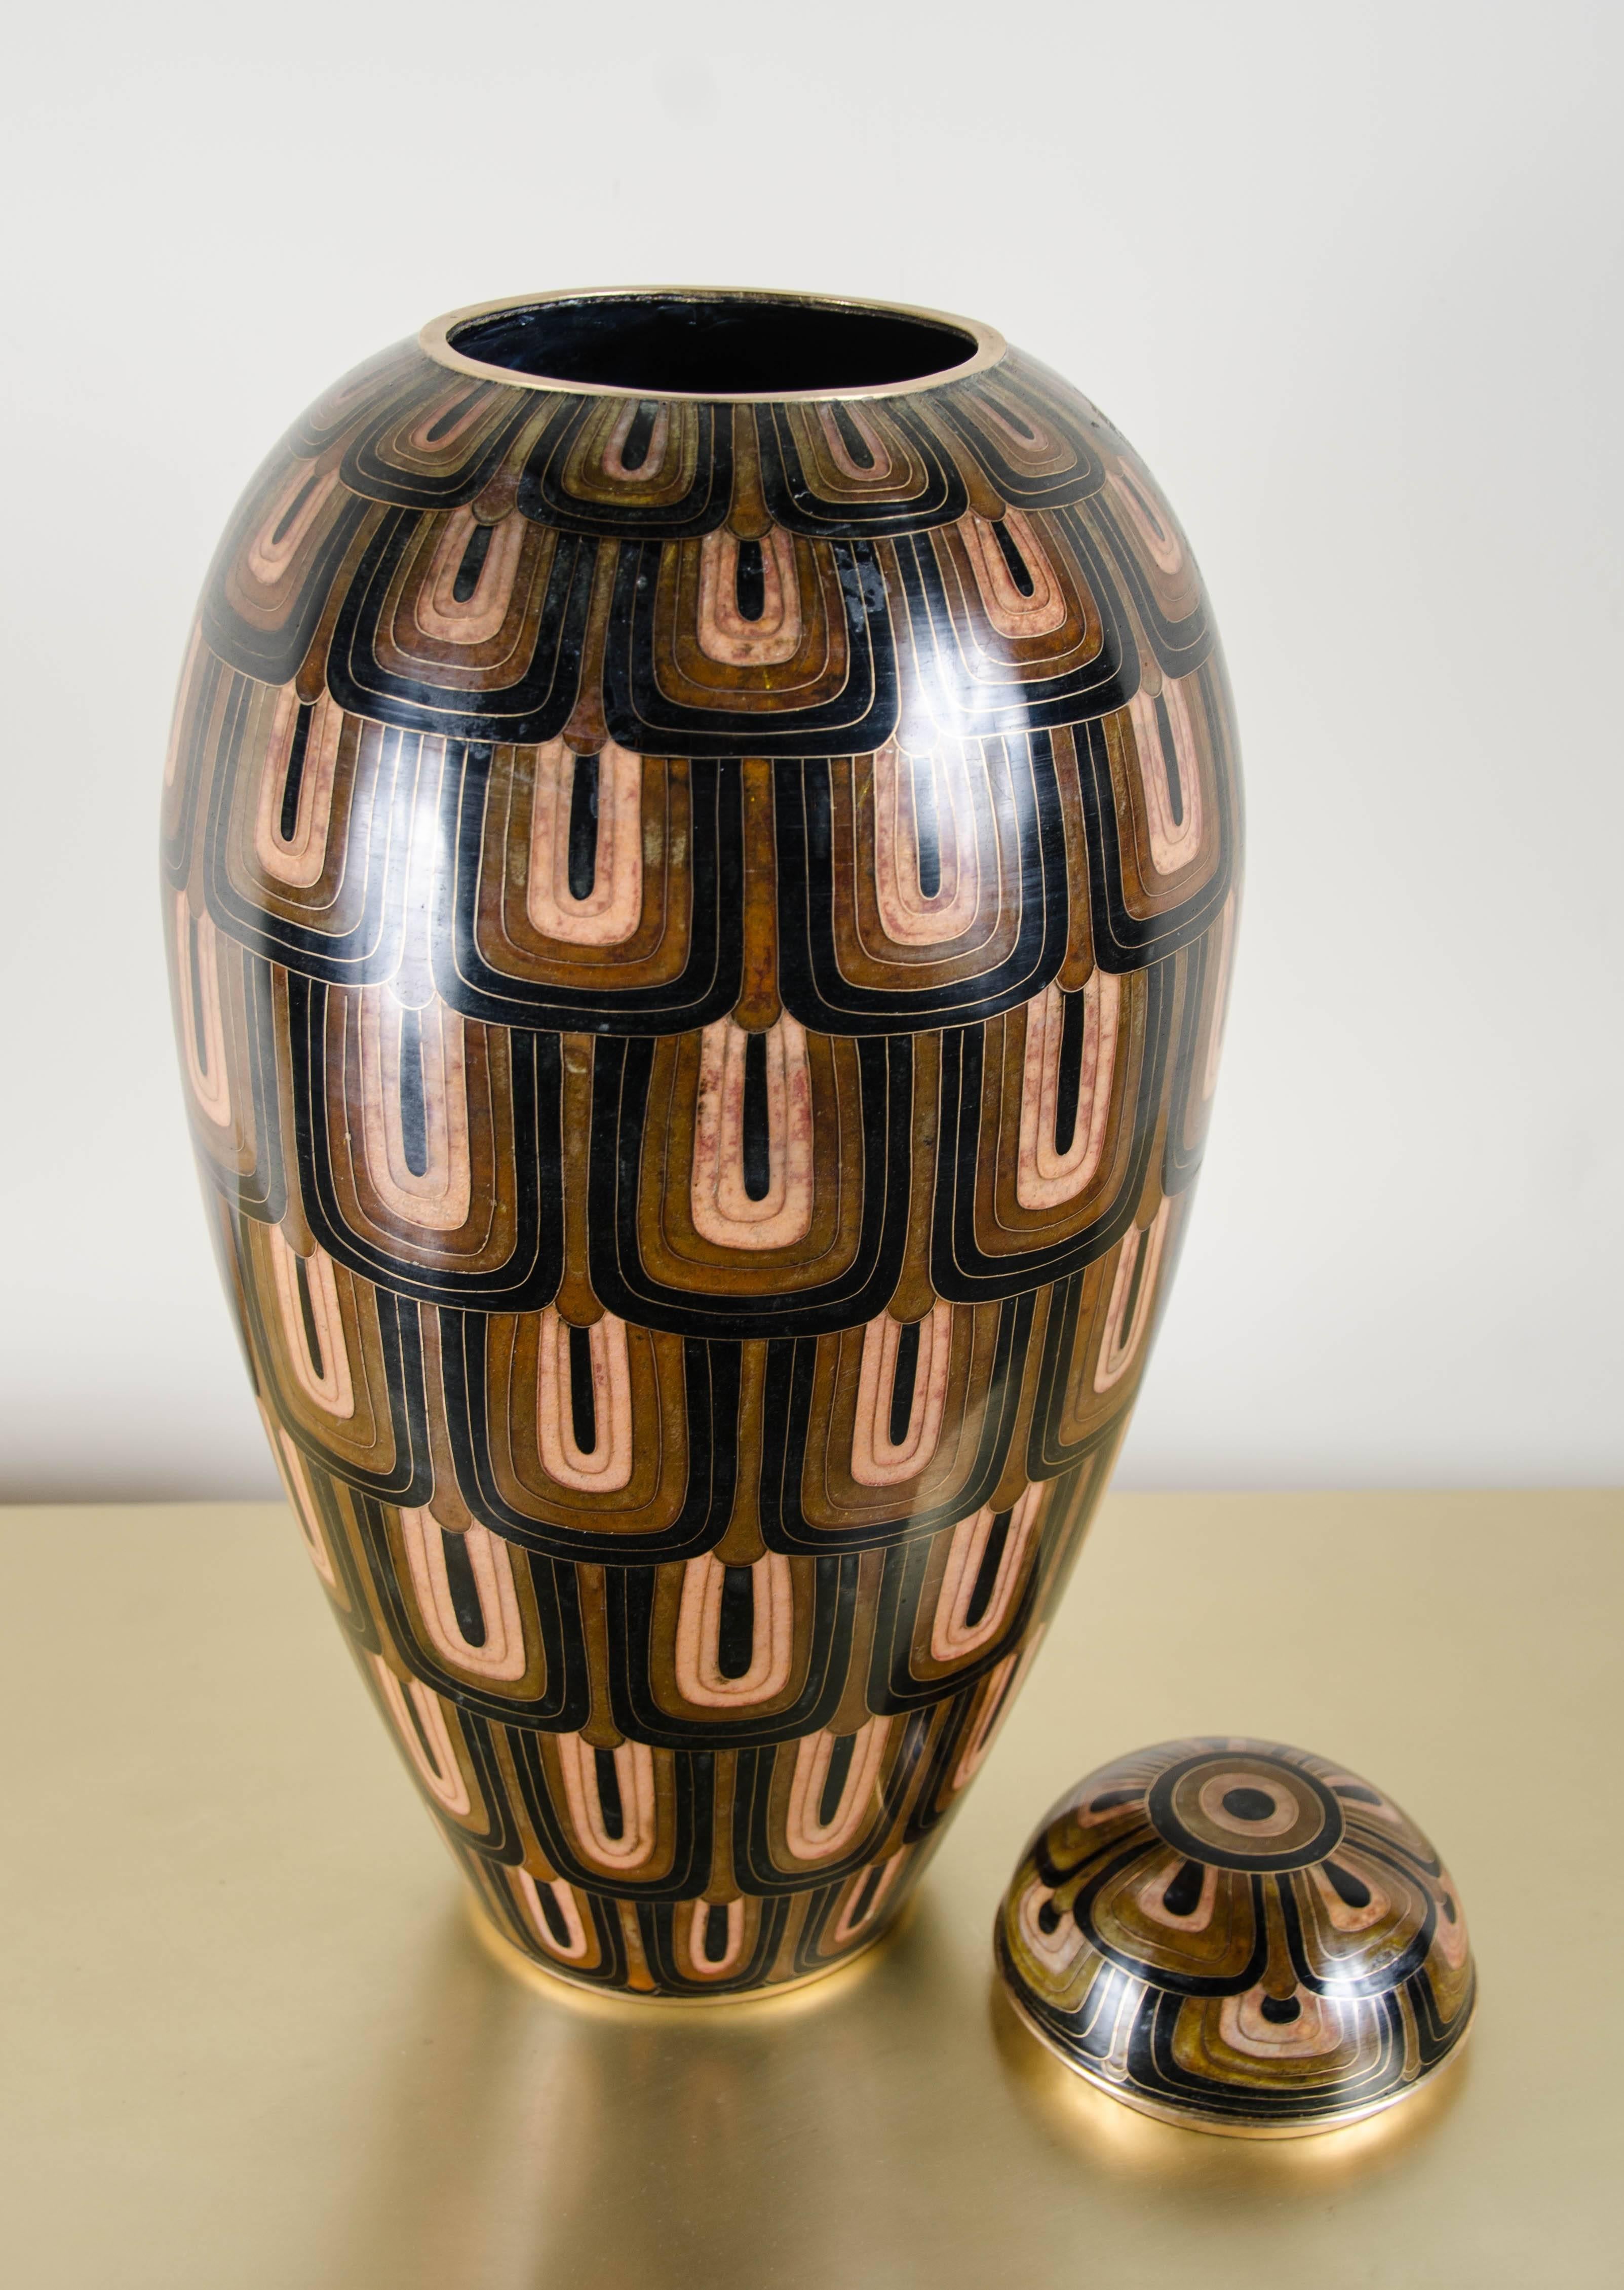 Cloissoné Baluster Jar & Lid, Fish Scale Design by Robert Kuo, Limited Edition Cloisonné For Sale